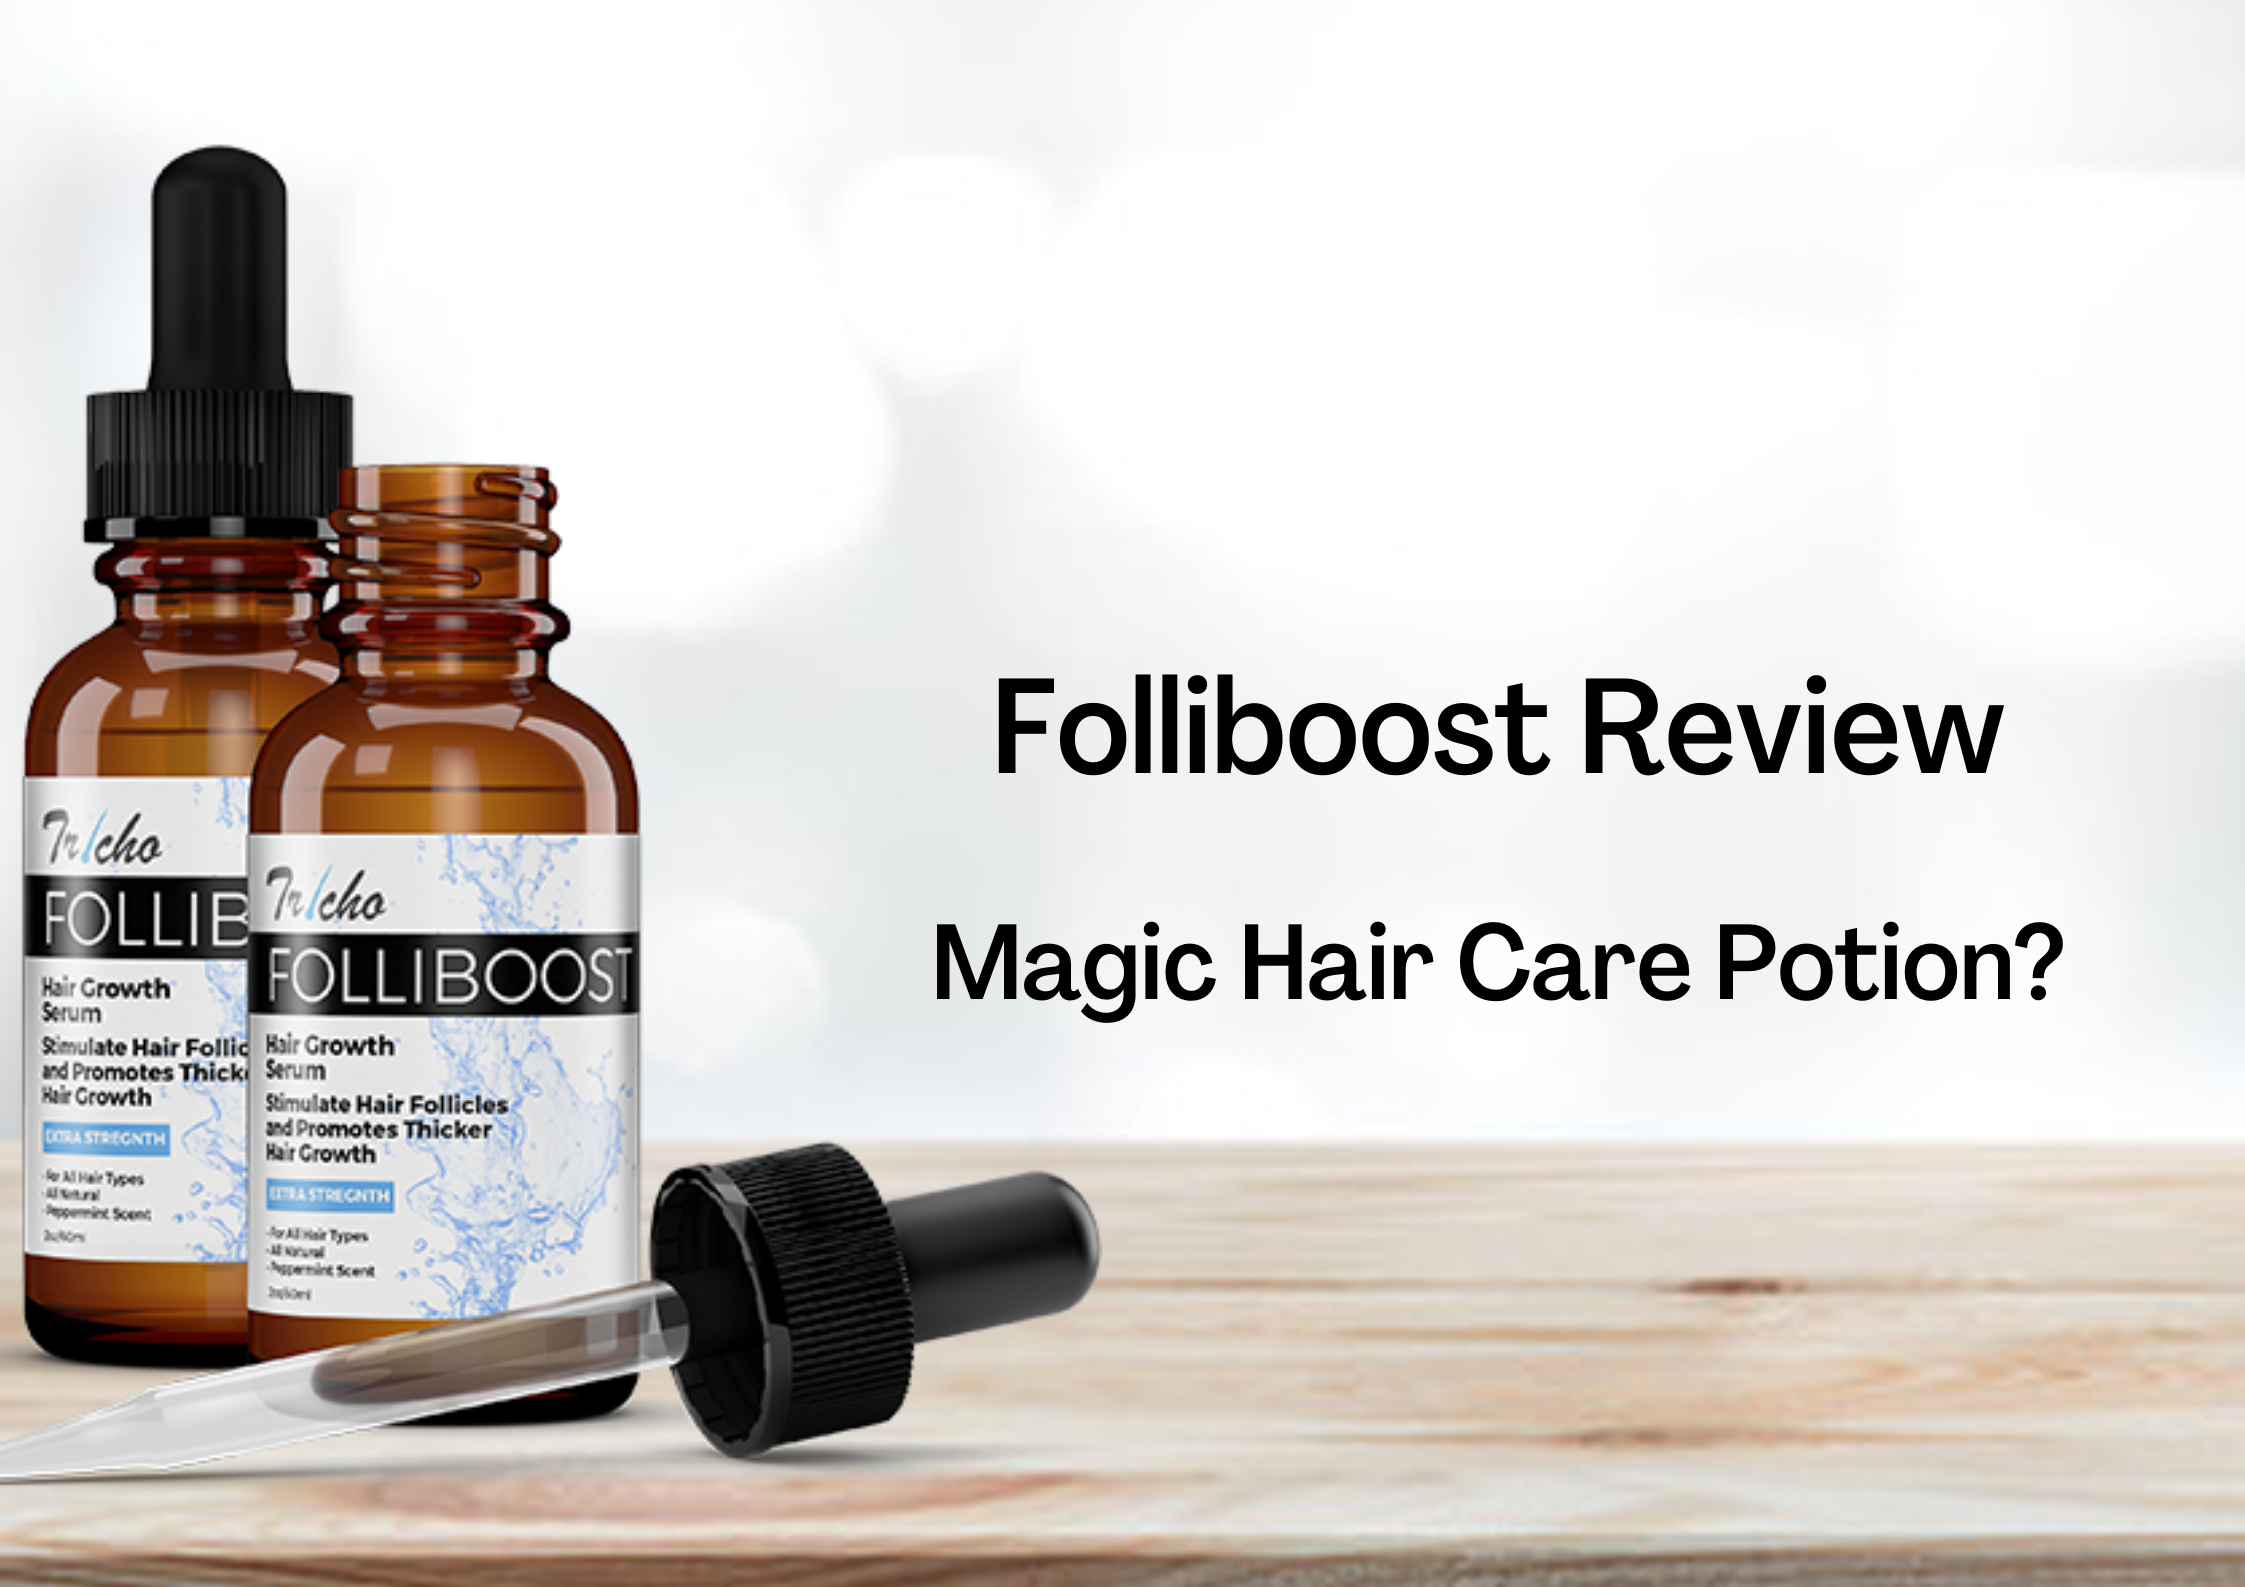 Folliboost Reviews | Magic Hair Care Potion? - Women In The World